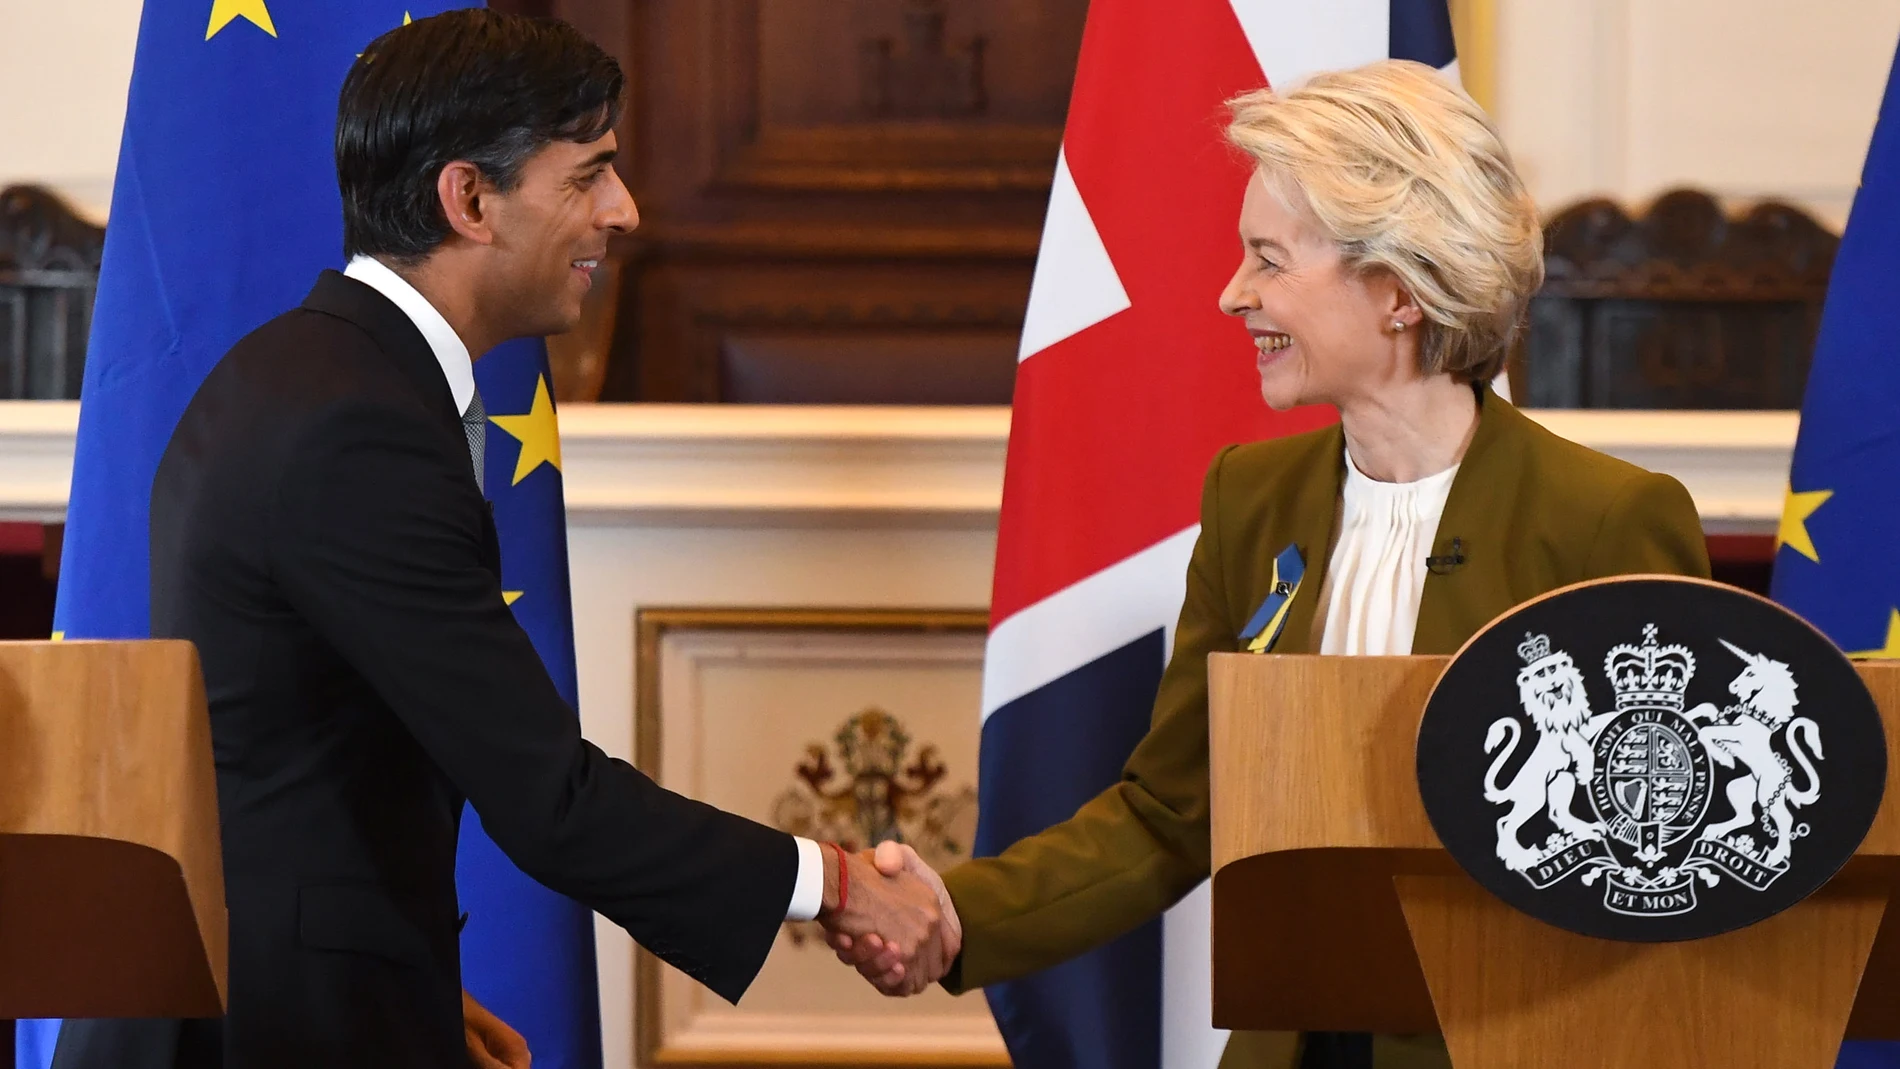 Windsor (United Kingdom), 27/02/2023.- Britain's Prime Minister Rishi Sunak (L) and European Commission President Ursula von der Leyen (R) shake hands at the end of a joint news conference on a post-Brexit deal in Windsor, Britain, 27 February 2023. The UK and European Union reached a deal on Northern Ireland's trading arrangements, ending more than a year of often acrimonious wrangling over the post-Brexit settlement for the region, people familiar with the matter said. (Irlanda, Reino Unido) EFE/EPA/CHRIS J. RATCLIFFE / POOL 